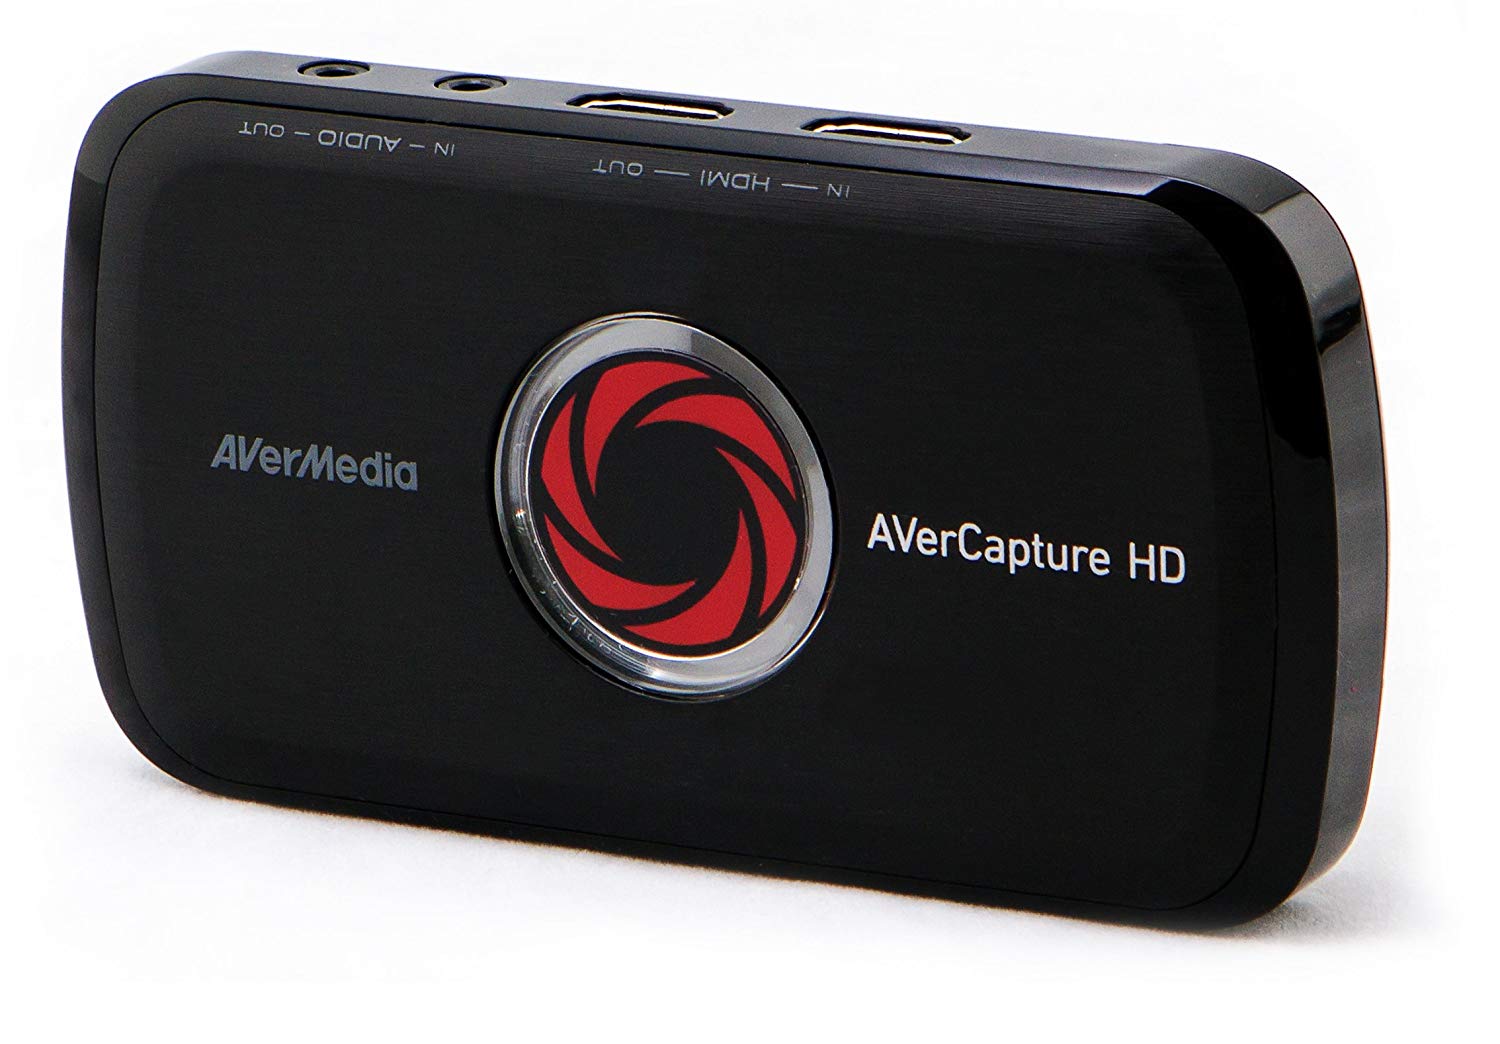 AVerMedia Live Gamer Portable Lite, Get started on  & Twitch, Game  Streaming and Game Capture for PS4, Xbox One, Nintendo Switch – HD 1080p,  Ultra Low Latency, USB, H.264 Hardware Encoding –